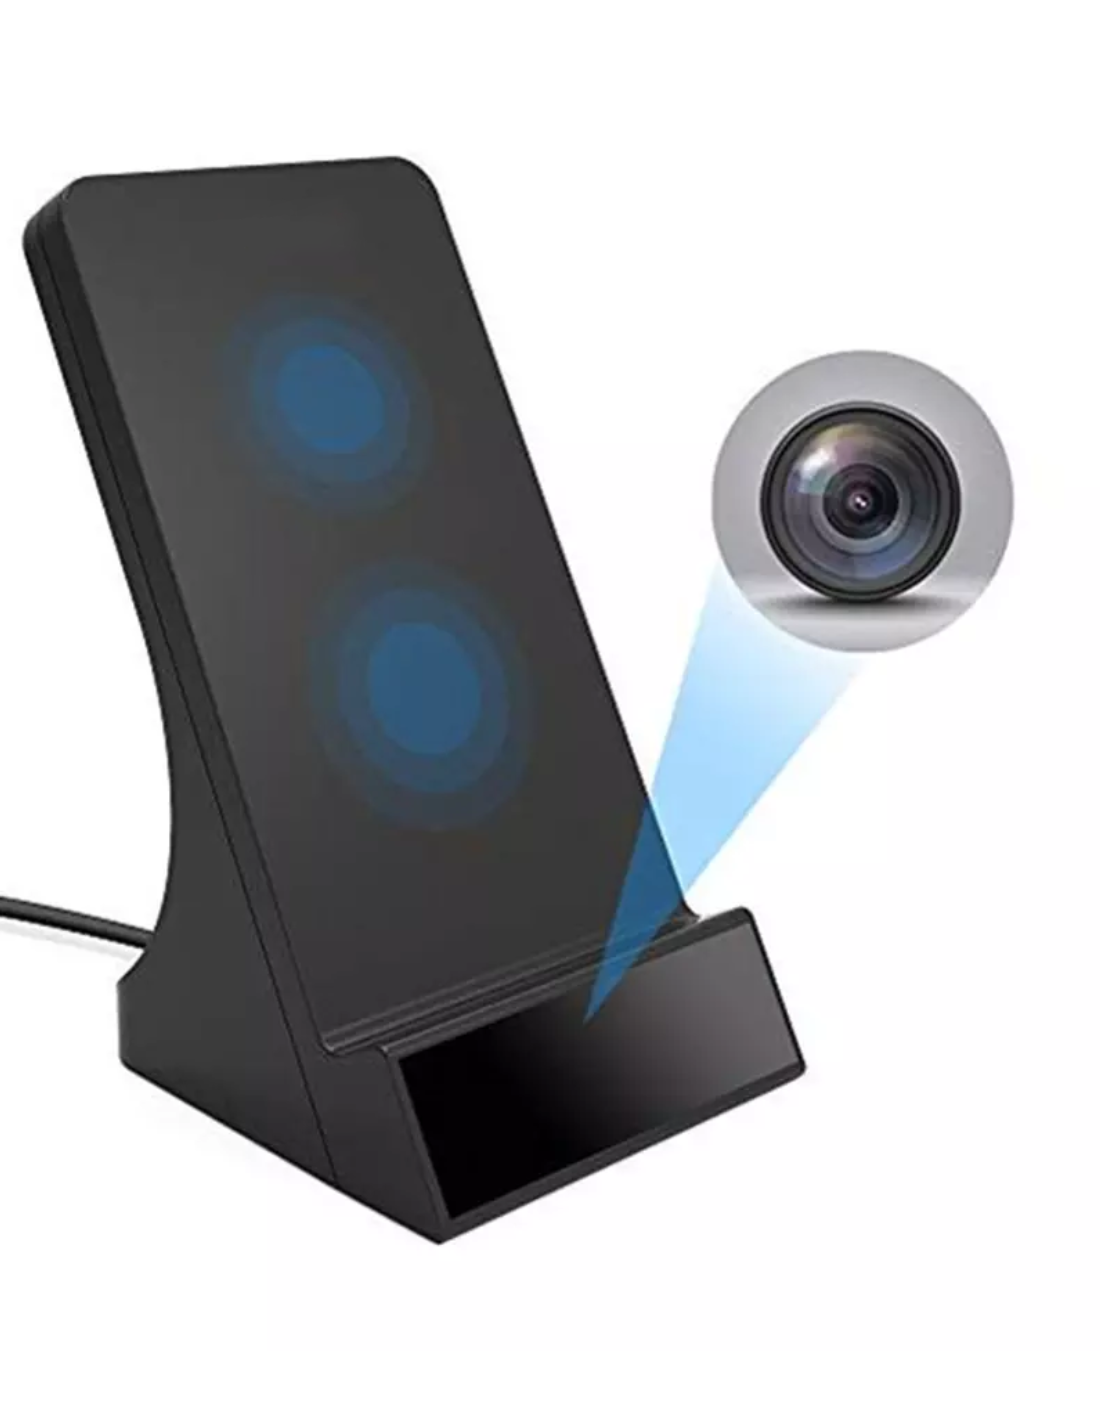 https://securvision.fr/4603-thickbox_default/station-de-charge-pour-telephone-camera-espion-wifi.jpg